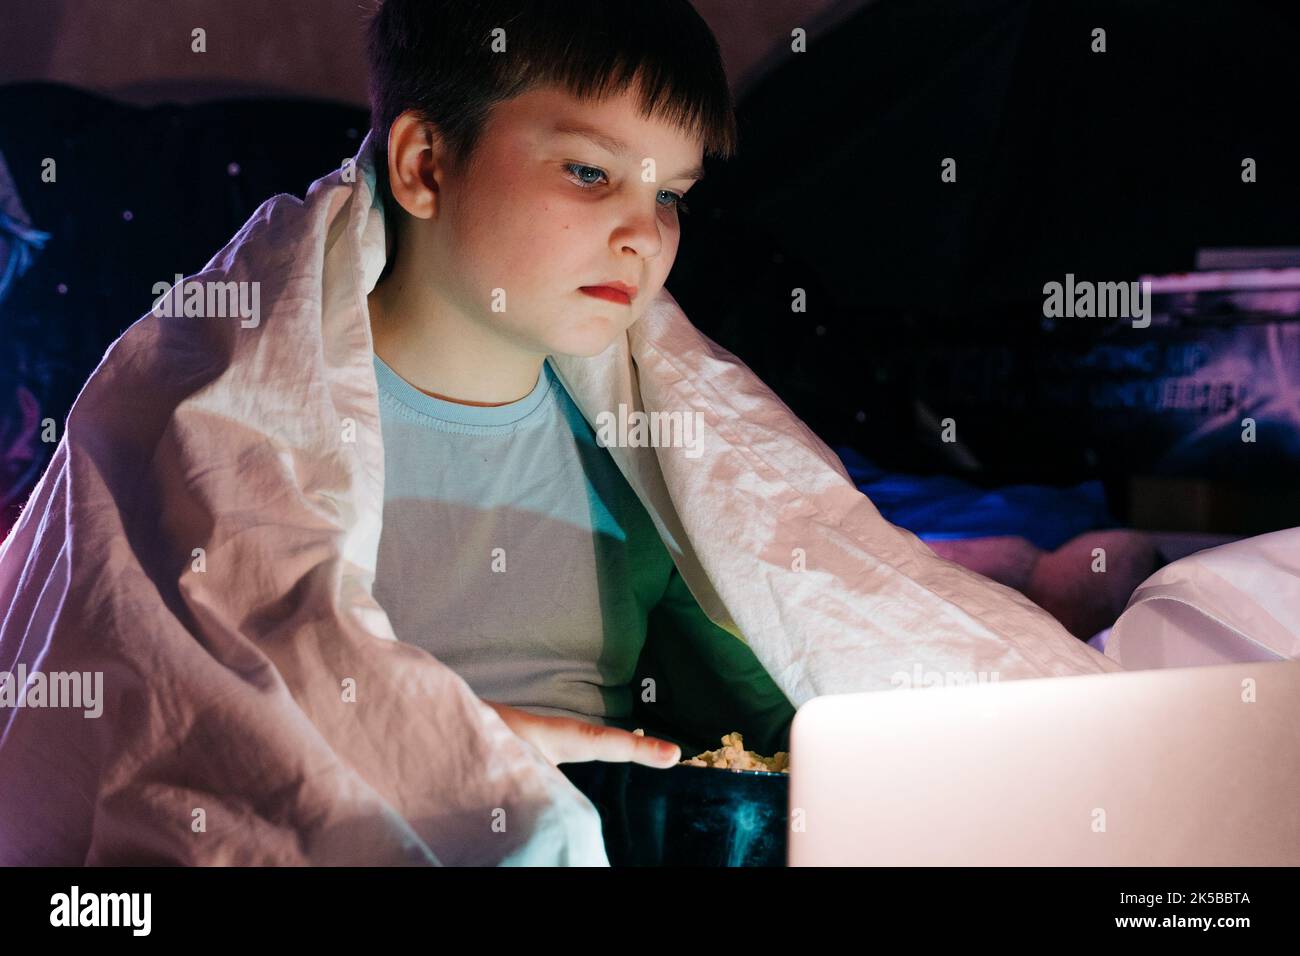 Happy kid son laughing eat popcorn remote control watching funny comedy tv show sitting on sofa having fun viewing video on laptop in evening at home. Stock Photo